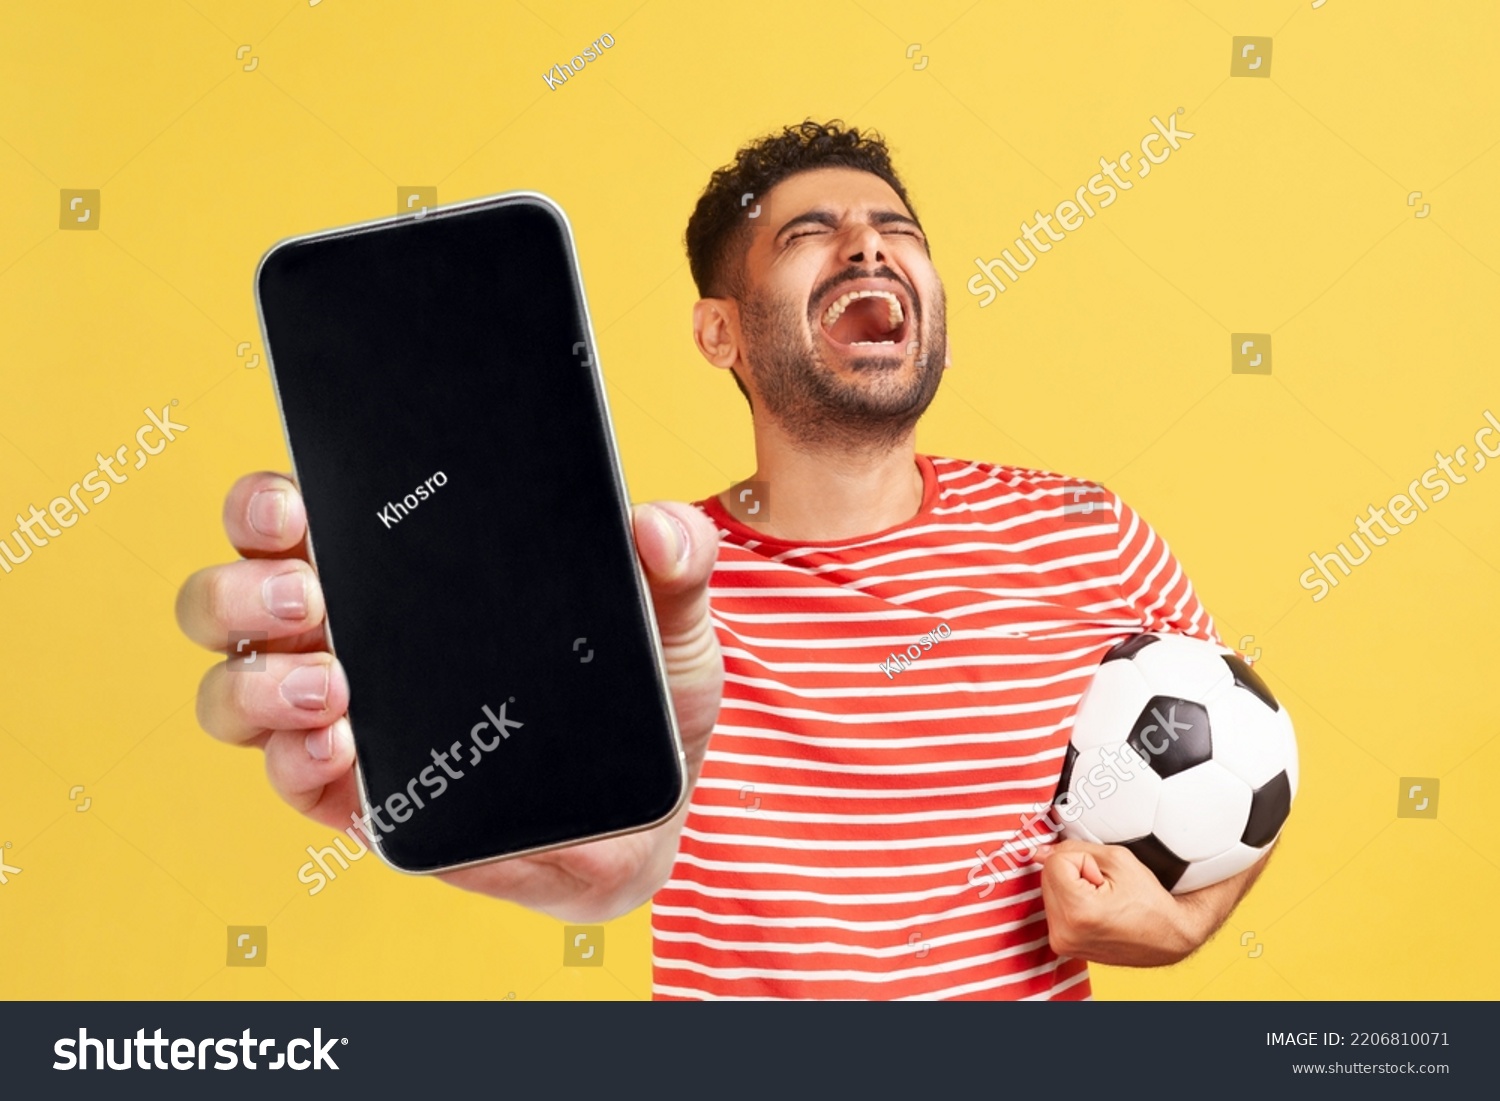 Extremely happy rejoicing bearded man in red T-shirt showing cell phone with blank display and holding soccer ball, celebrating his winning, betting. Indoor studio shot isolated on yellow background. #2206810071